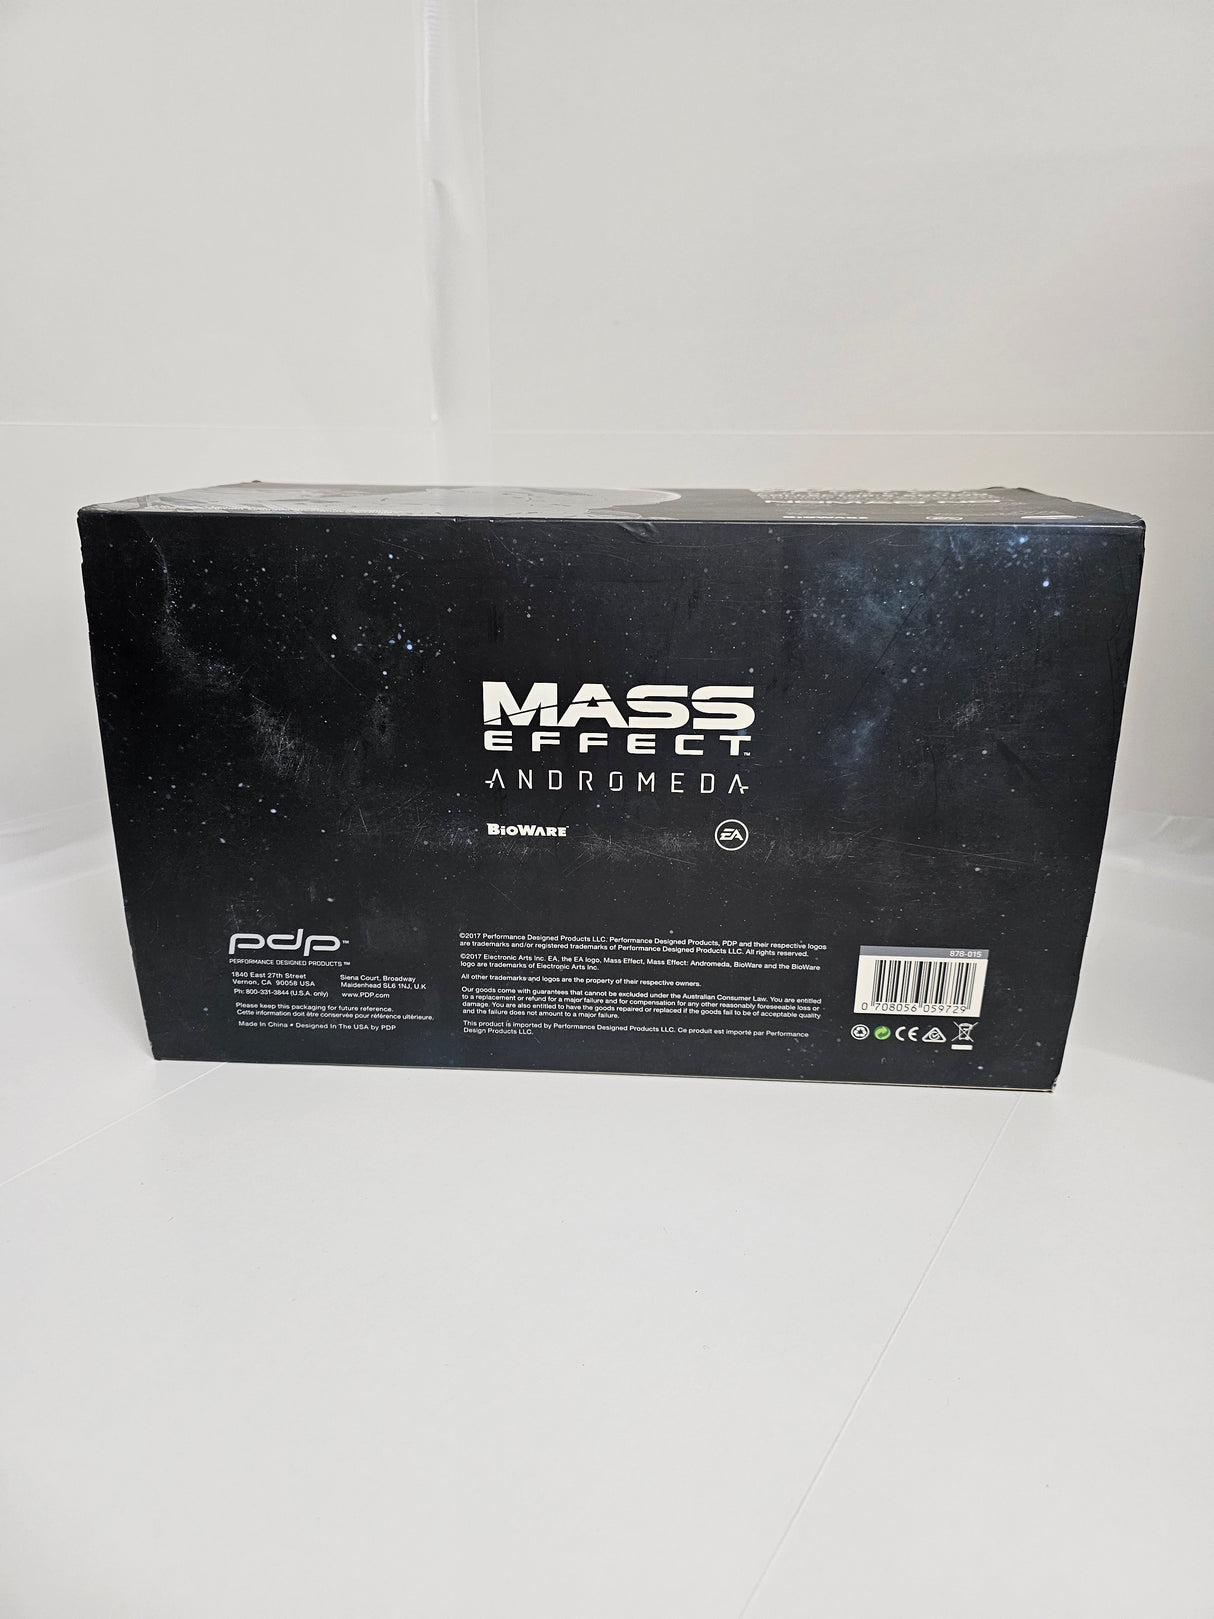 Mass Effect Andromeda Nomad ND1 Dicast Collector's Edition